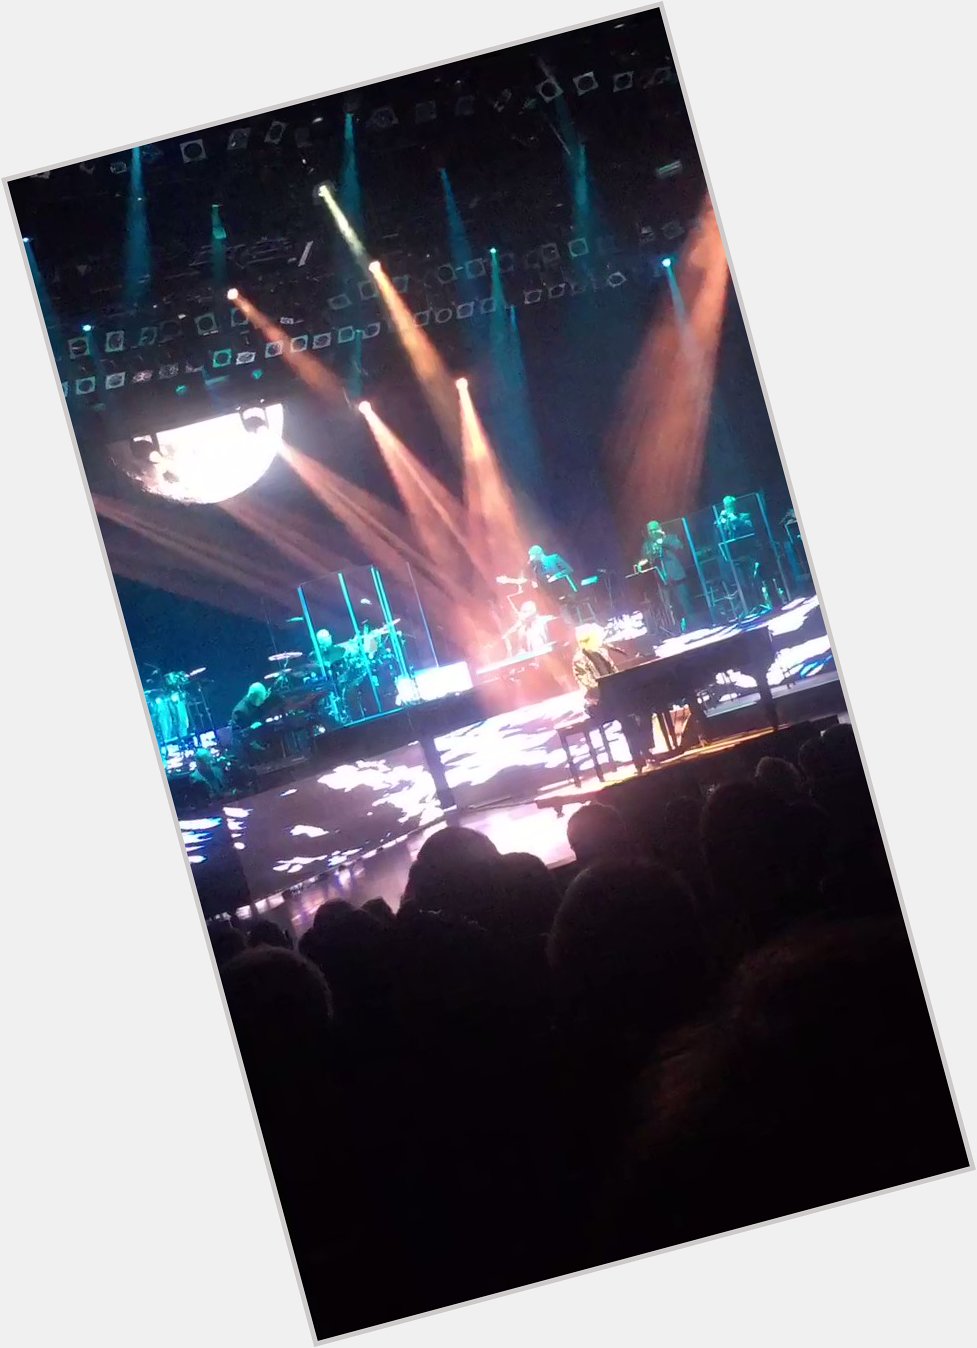 Take me back!! Lol when I seen Barry Manilow!  what a show!! Happy birthday Mr. Mainilow! 